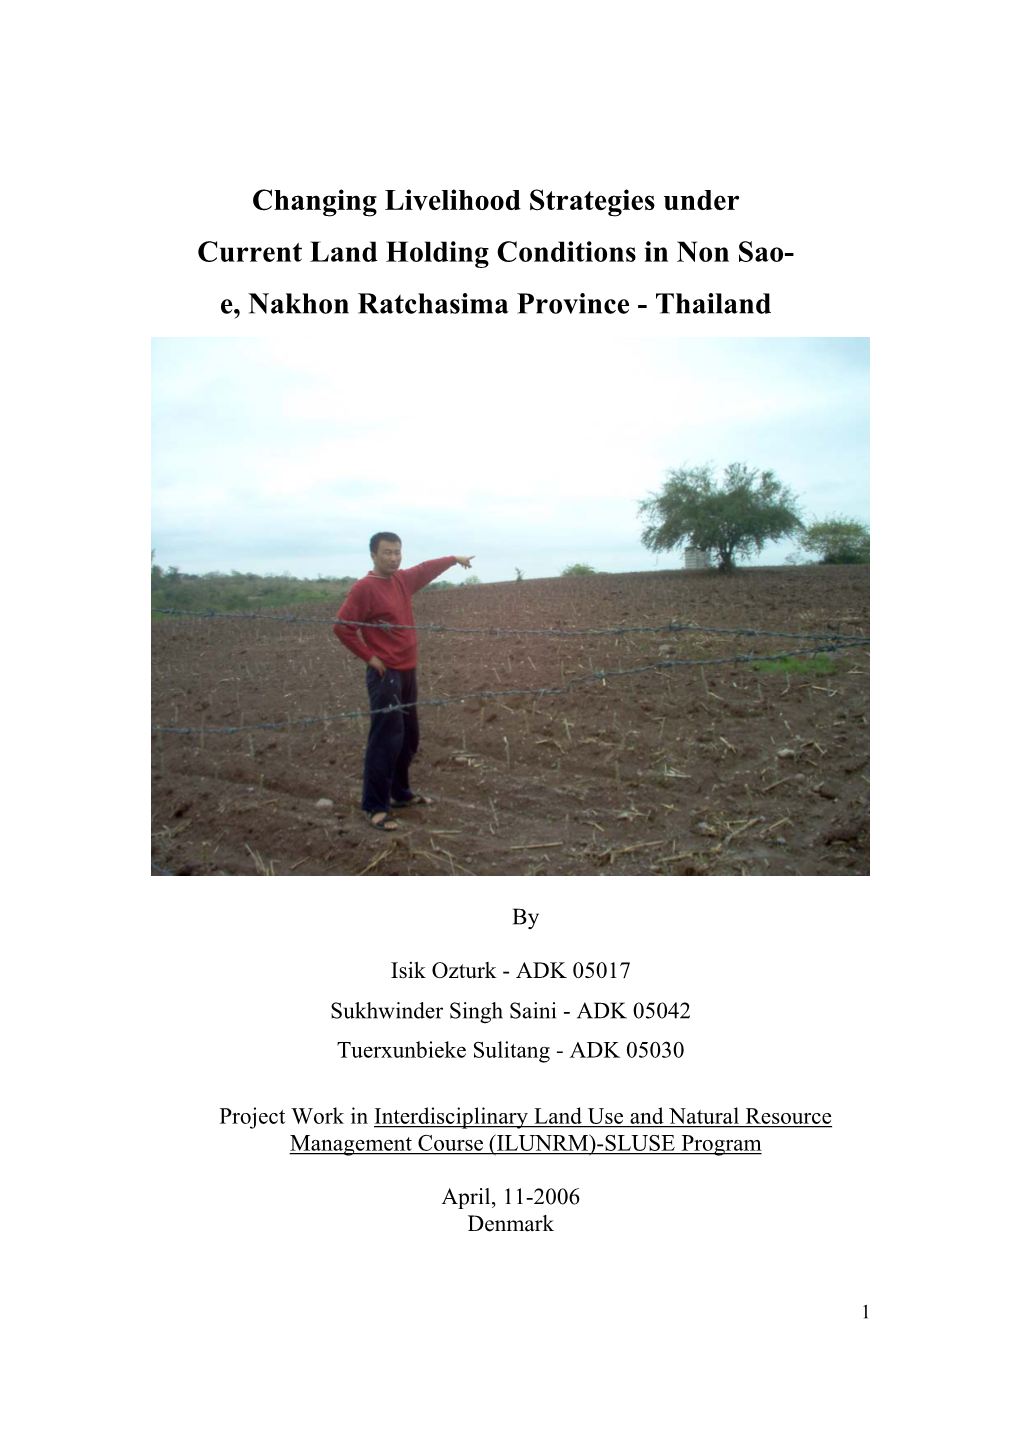 Changing Livelihood Strategies Under Current Land Holding Conditions in Non Sao- E, Nakhon Ratchasima Province - Thailand